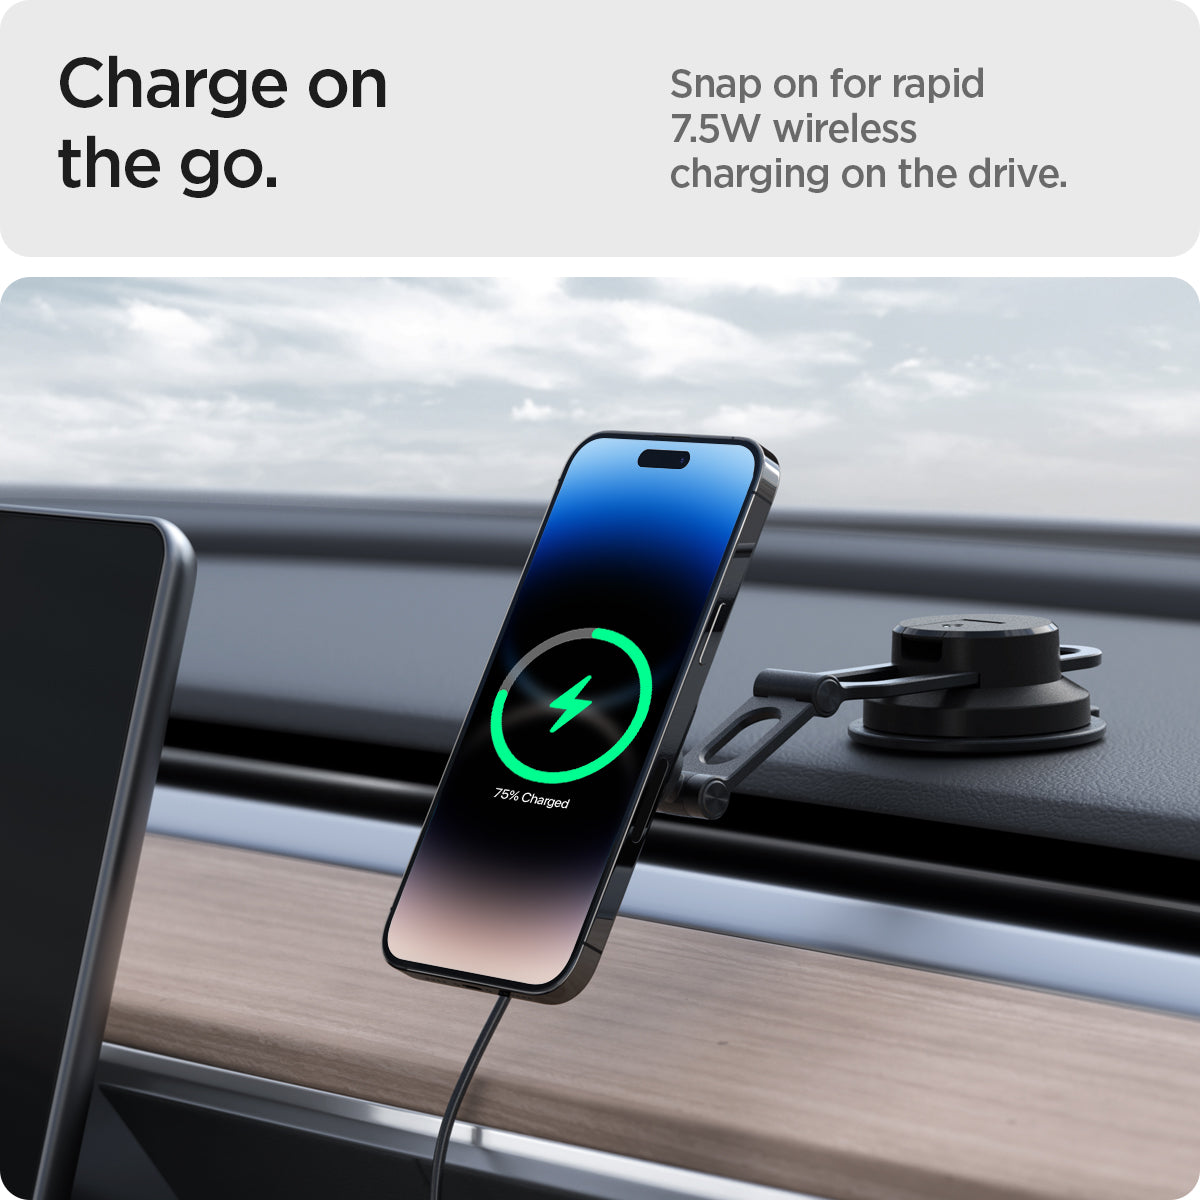 ACP04629 - OneTap Pro 3 Dashboard Car Mount ITS35W-3 (MagFit) in Black showing the Charge on the go. Snap of for rapid 7.5W wireless charging on the drive. A device attached to a car mount